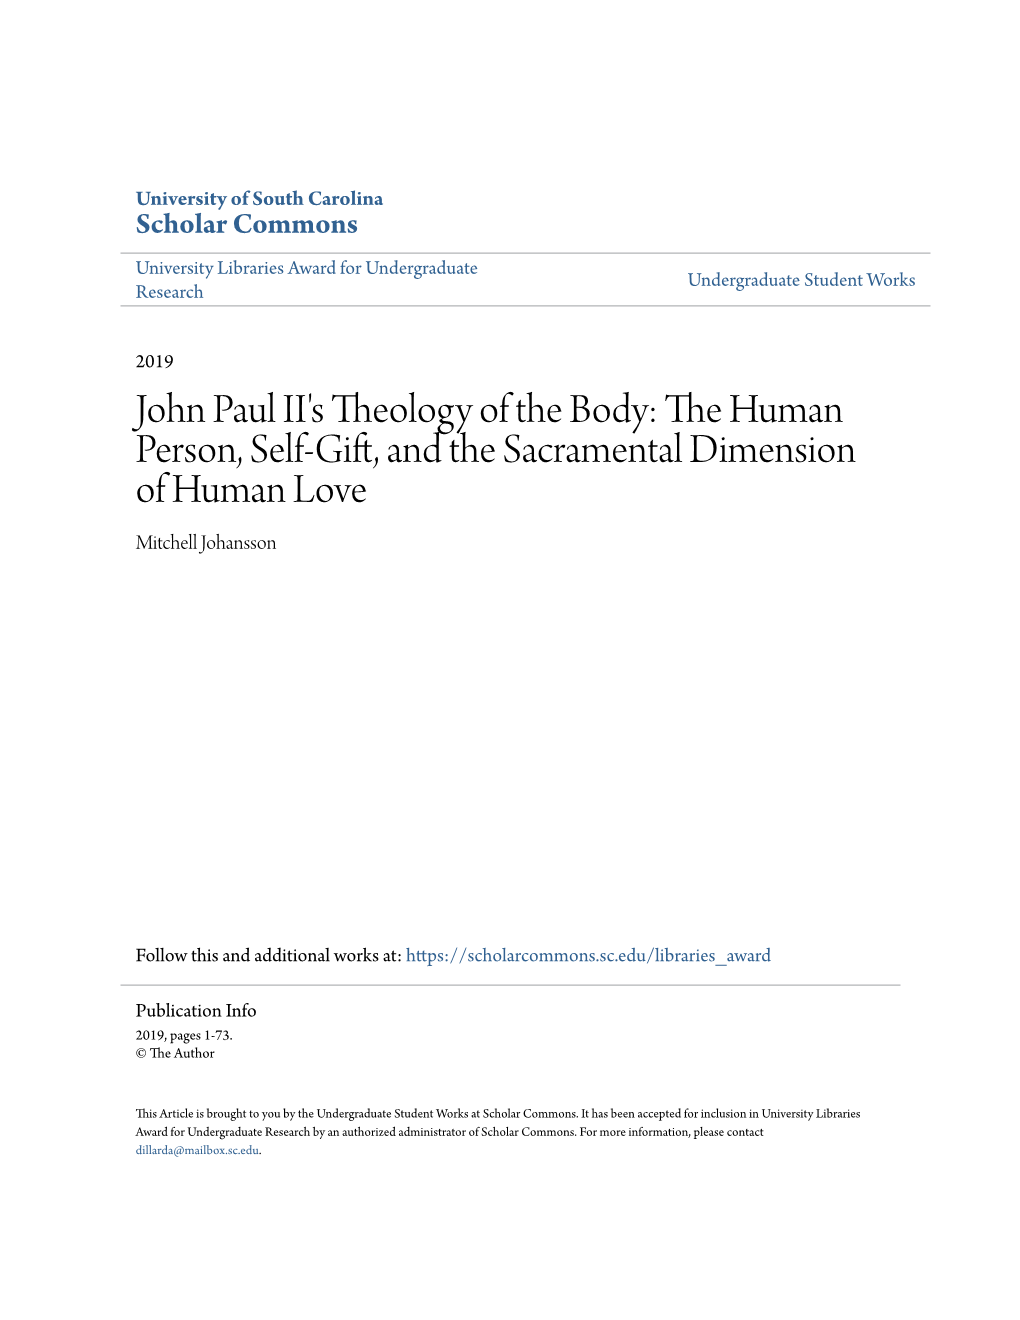 John Paul II's Theology of the Body: the Umh an Person, Self-Gift, and the Sacramental Dimension of Human Love Mitchell Johansson